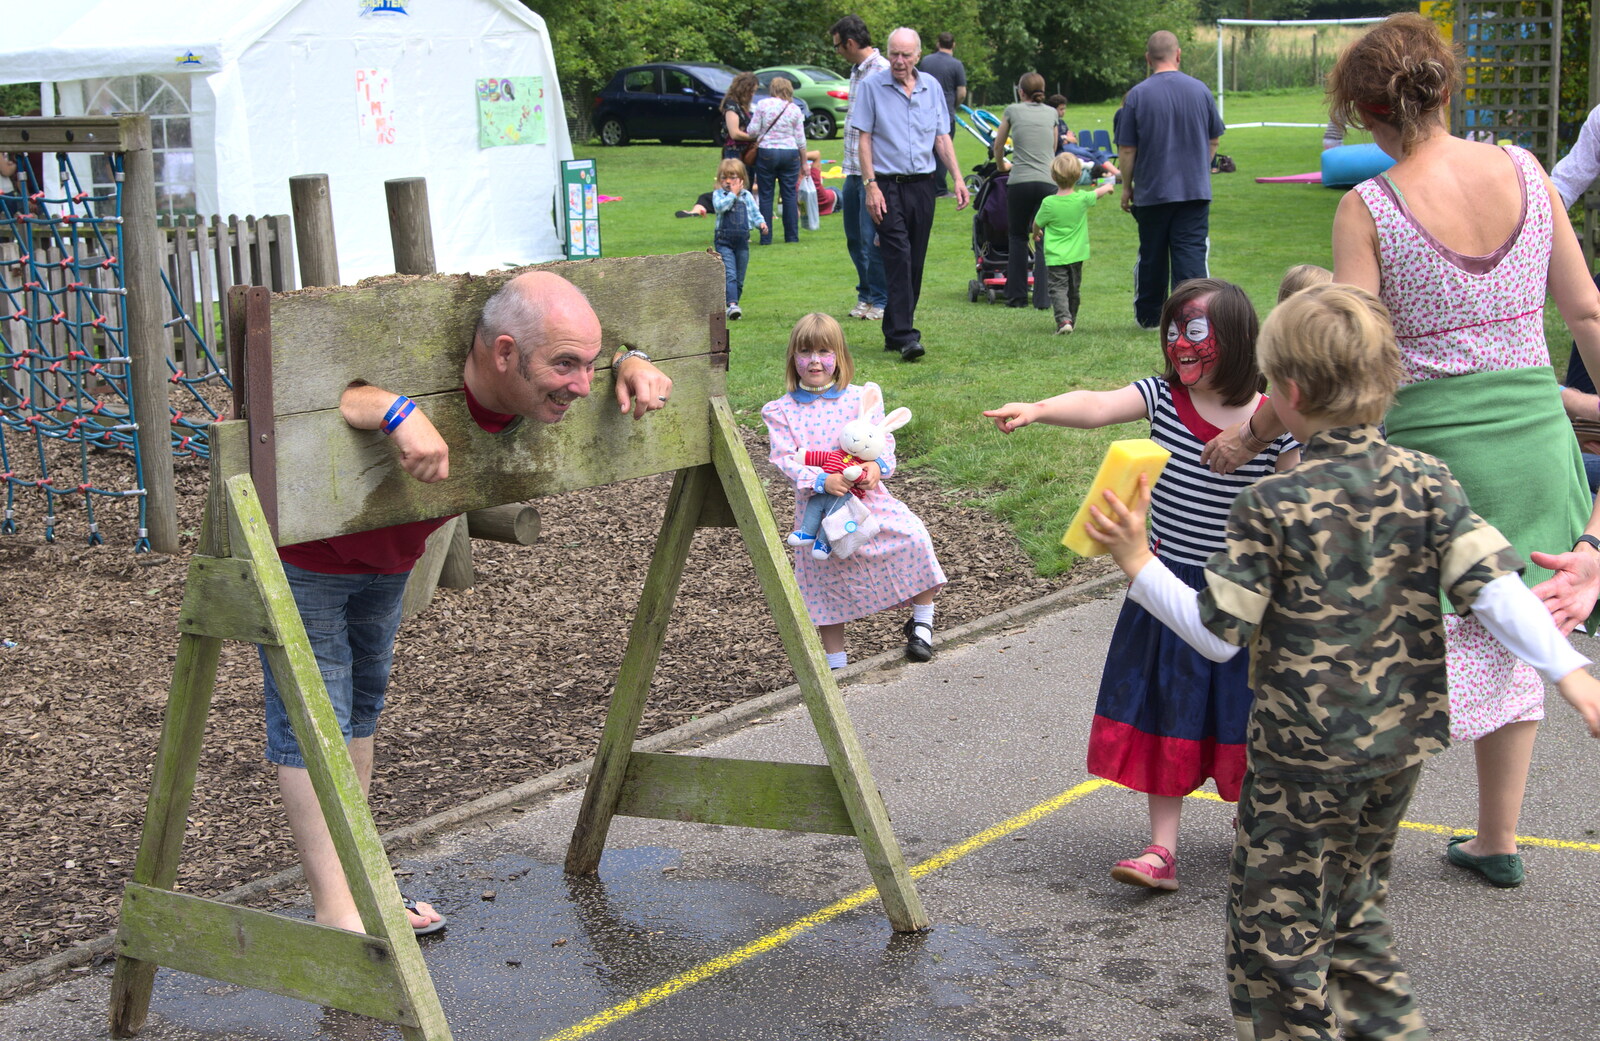 The caretaker gets a sponging from St. Peter and St. Paul's School Summer Fete, Eye, Suffolk - 12th July 2014